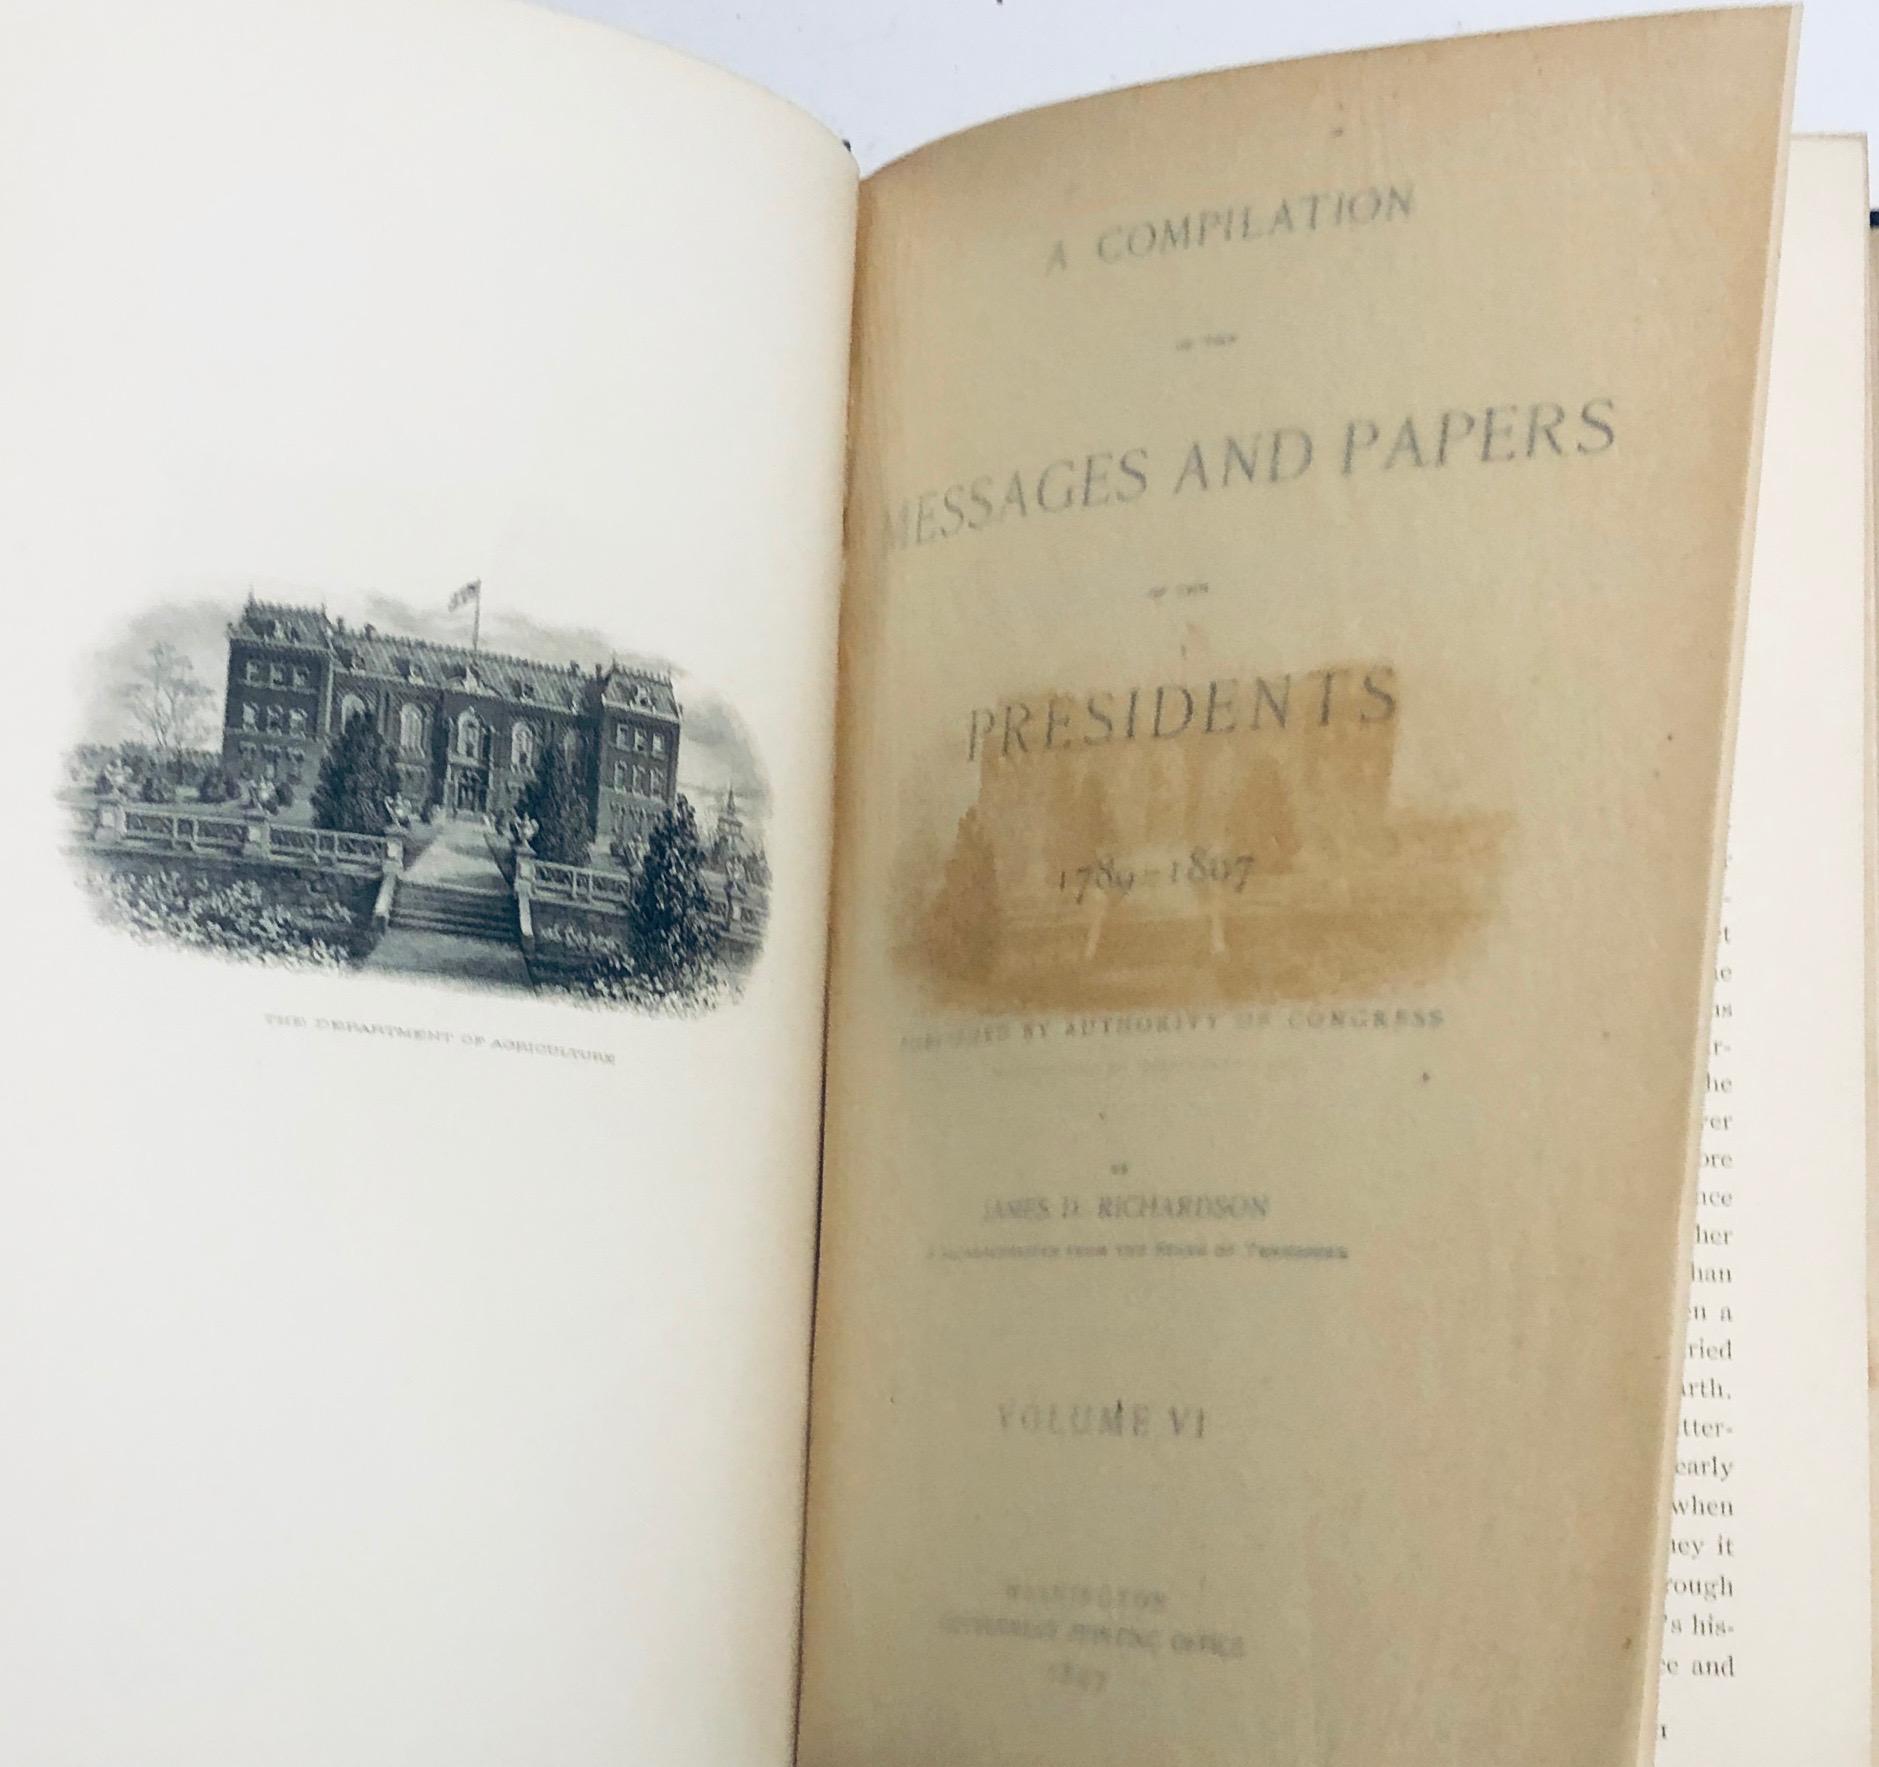 RARE Messages and Papers of the Presidents (1897) LINCOLN Edition with ASSASINATION